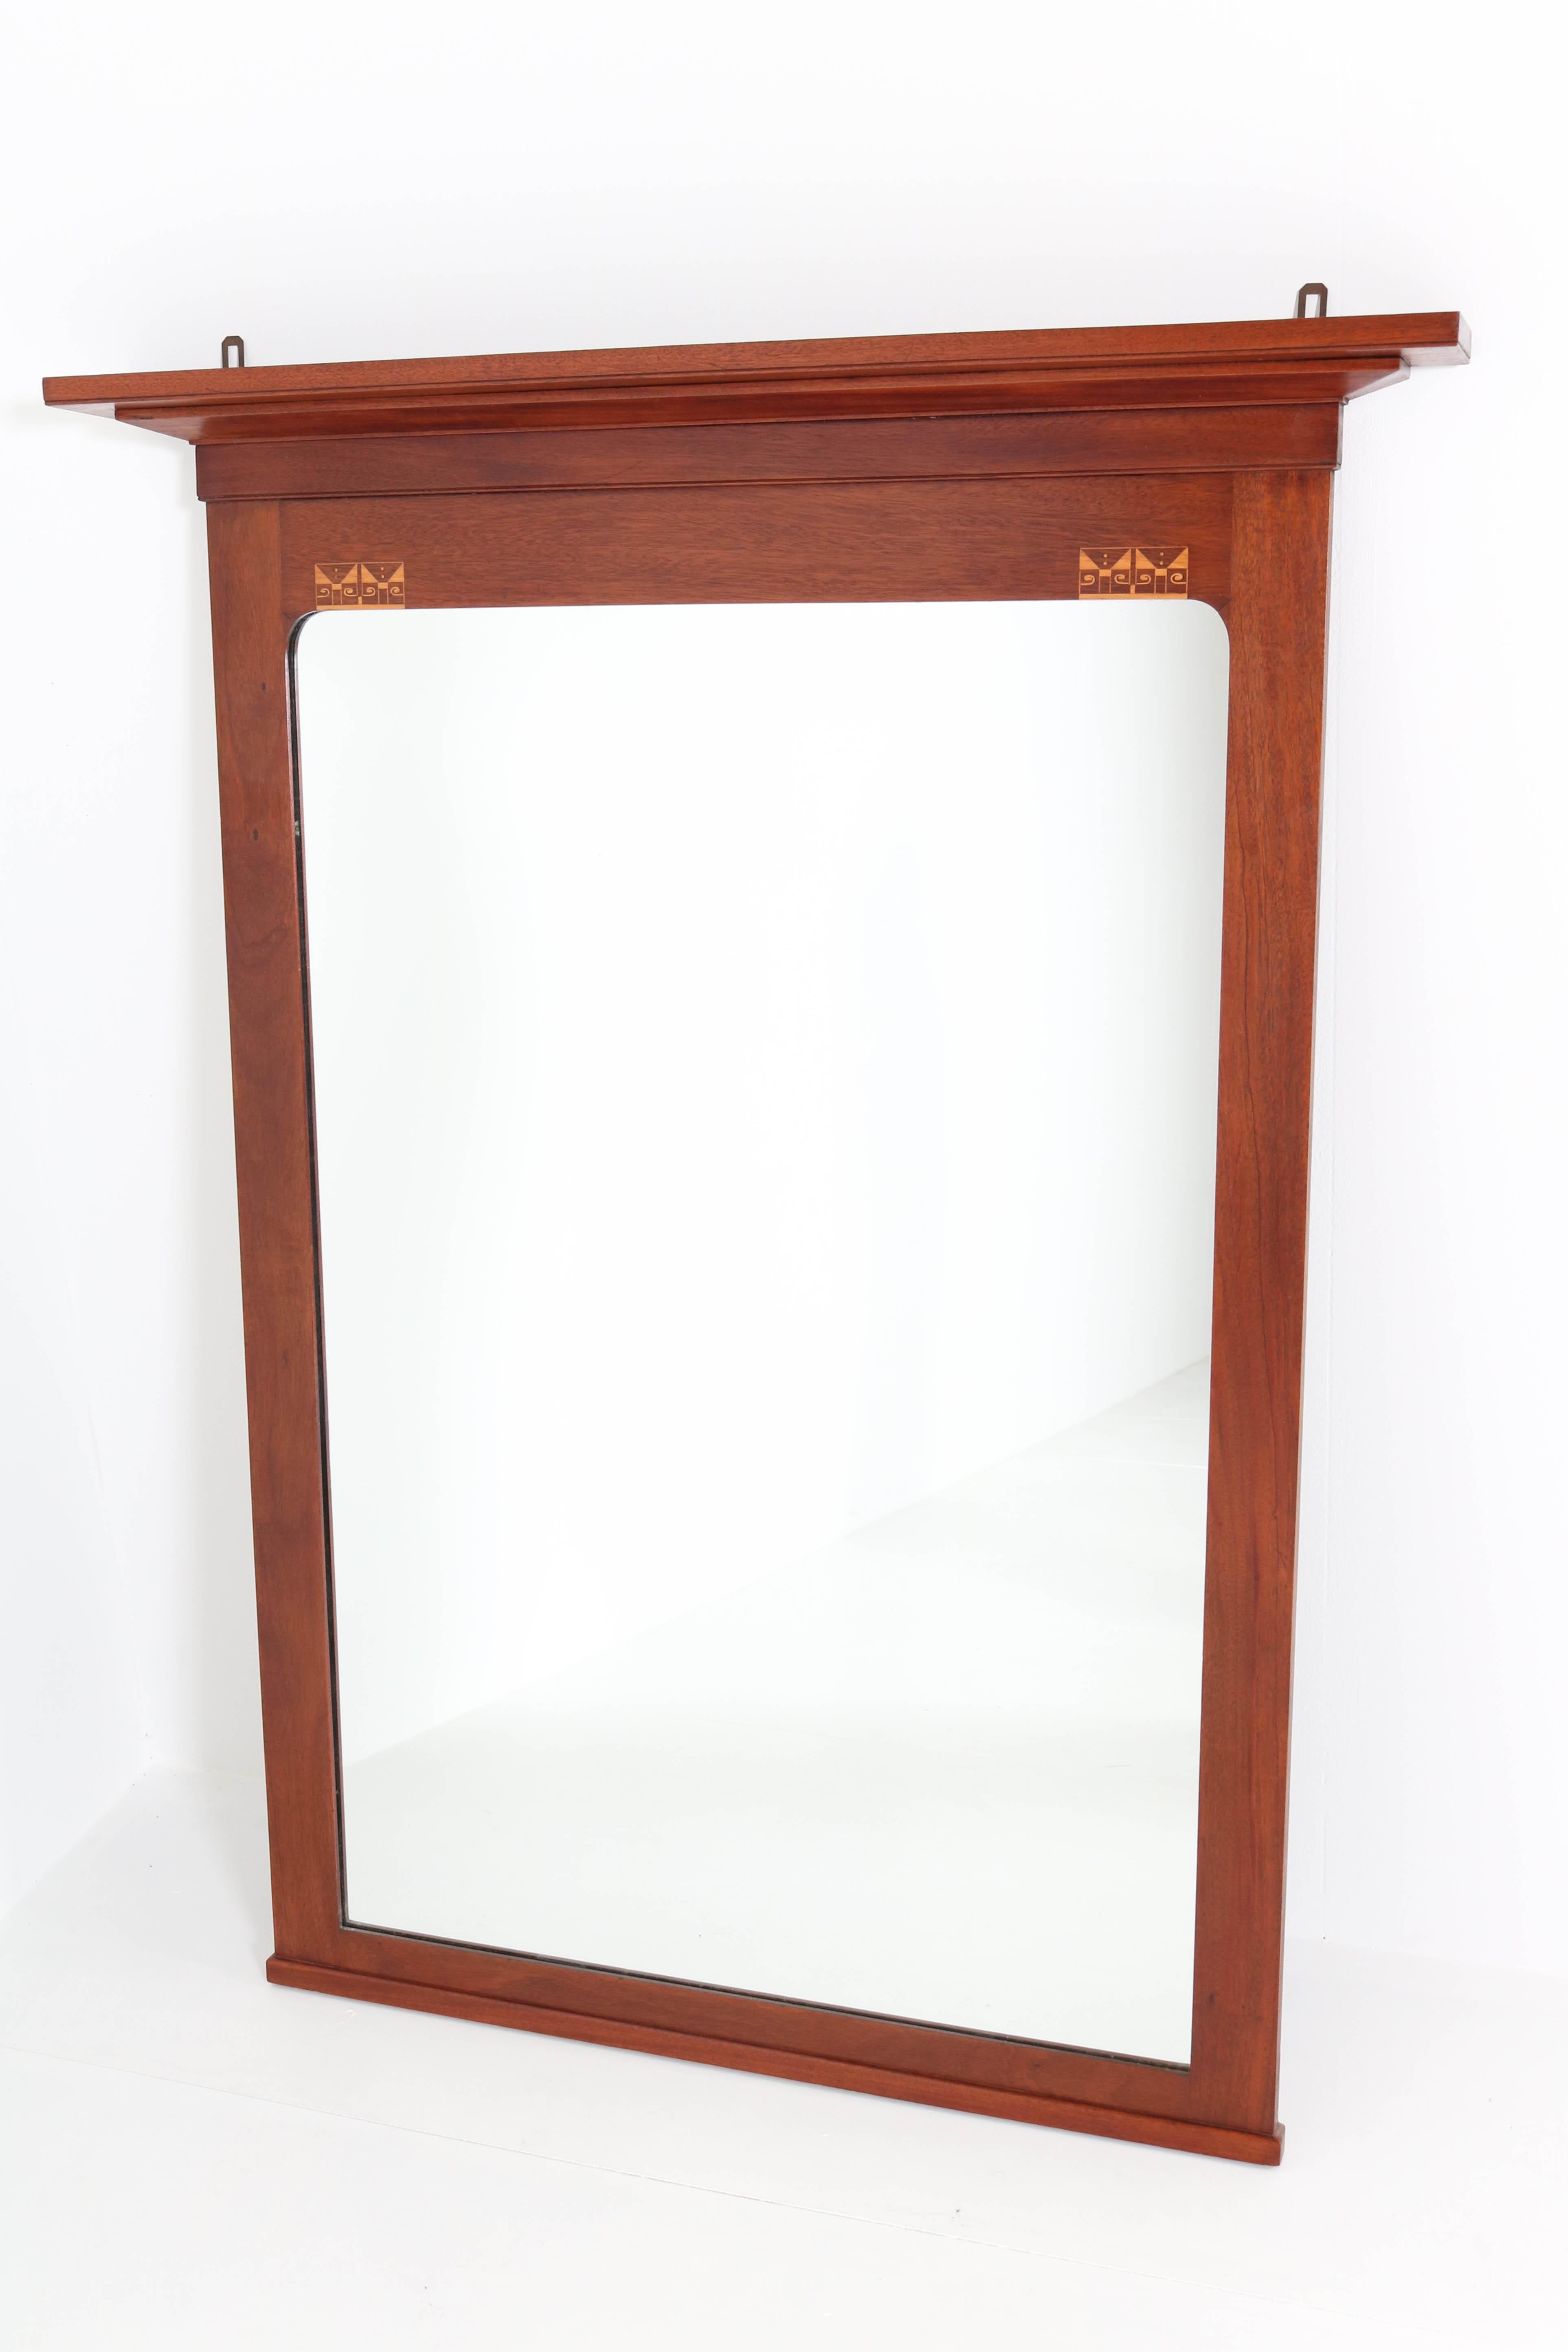 Mahogany Art Nouveau Arts & Crafts Mirror by J.M. Middelraad for Pander, 1900s In Good Condition For Sale In Amsterdam, NL